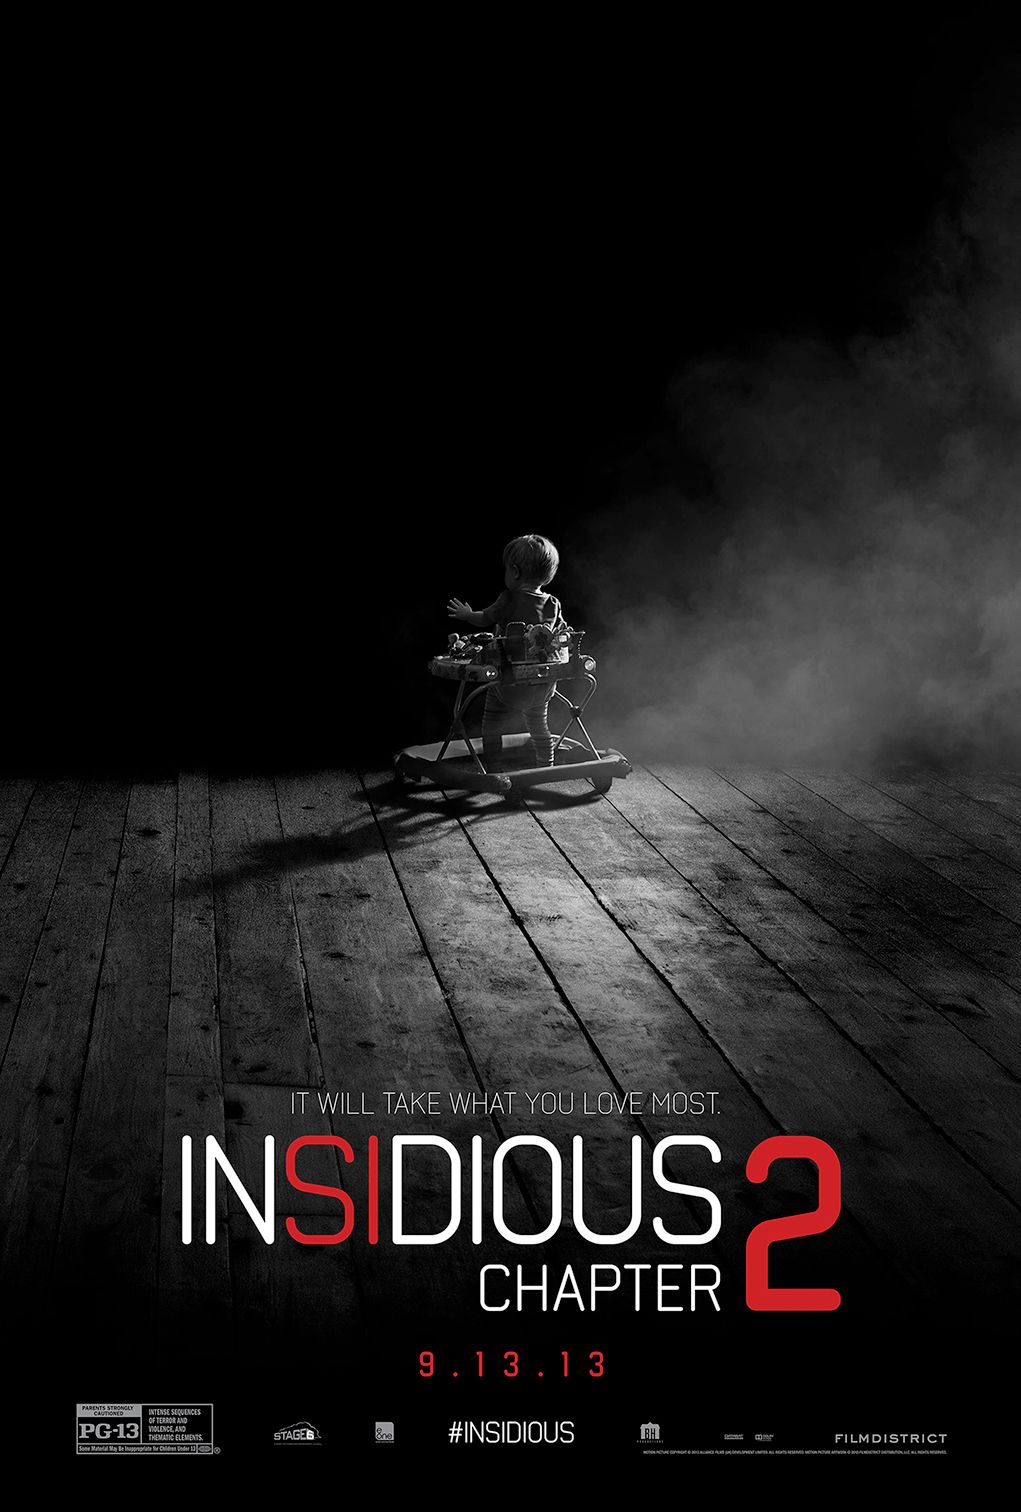 Insidious Chapter 2 poster